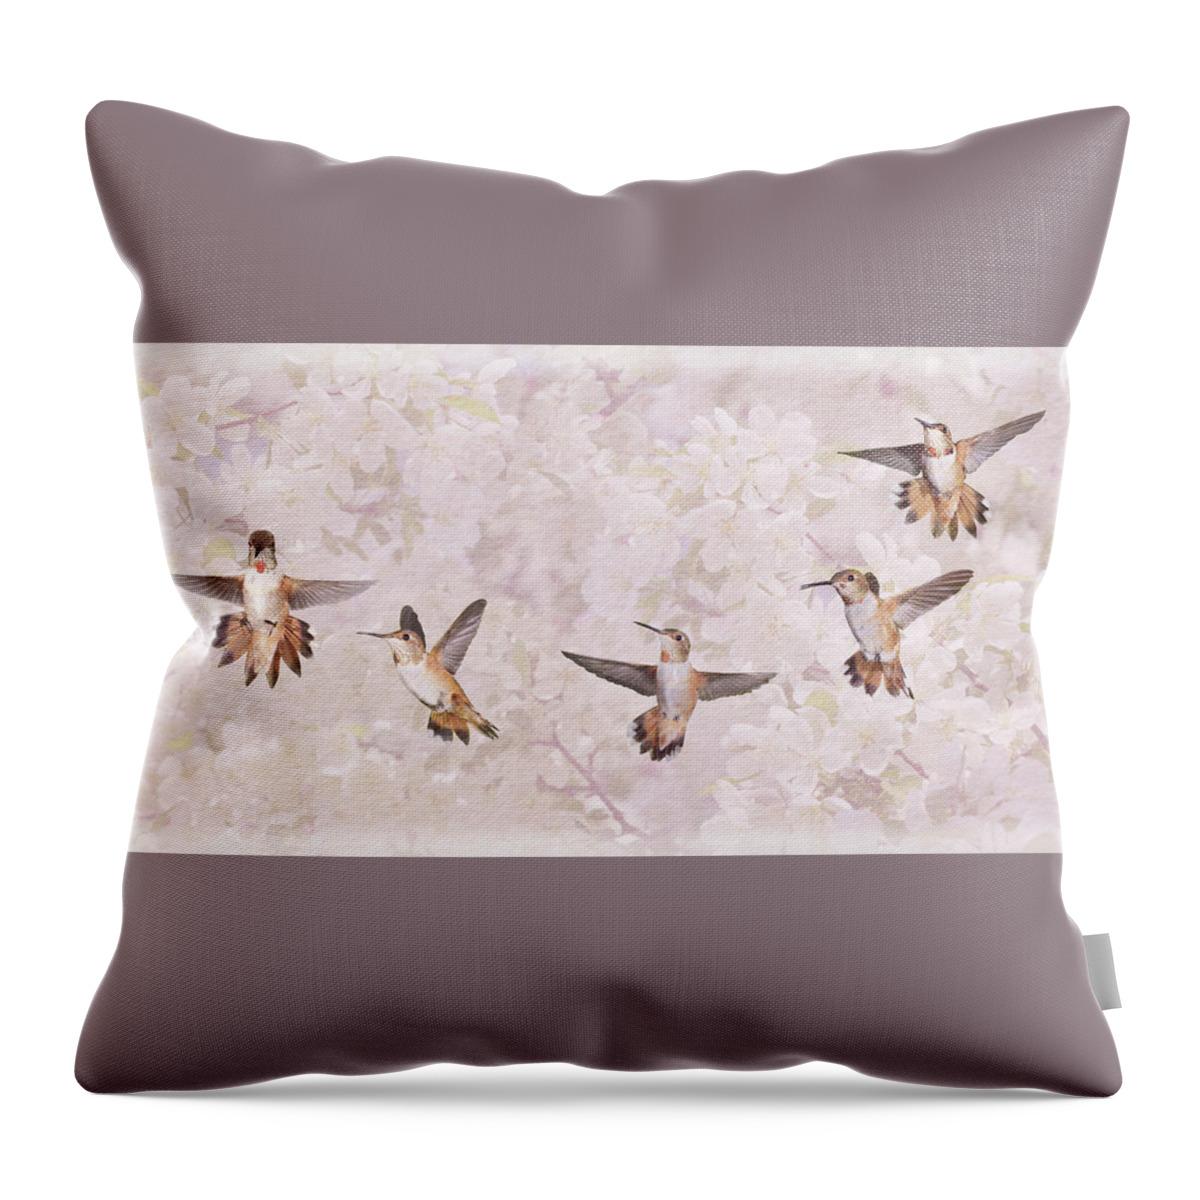 Hummingbirds Throw Pillow featuring the photograph Hummingbird Flying Sequence II by Leda Robertson